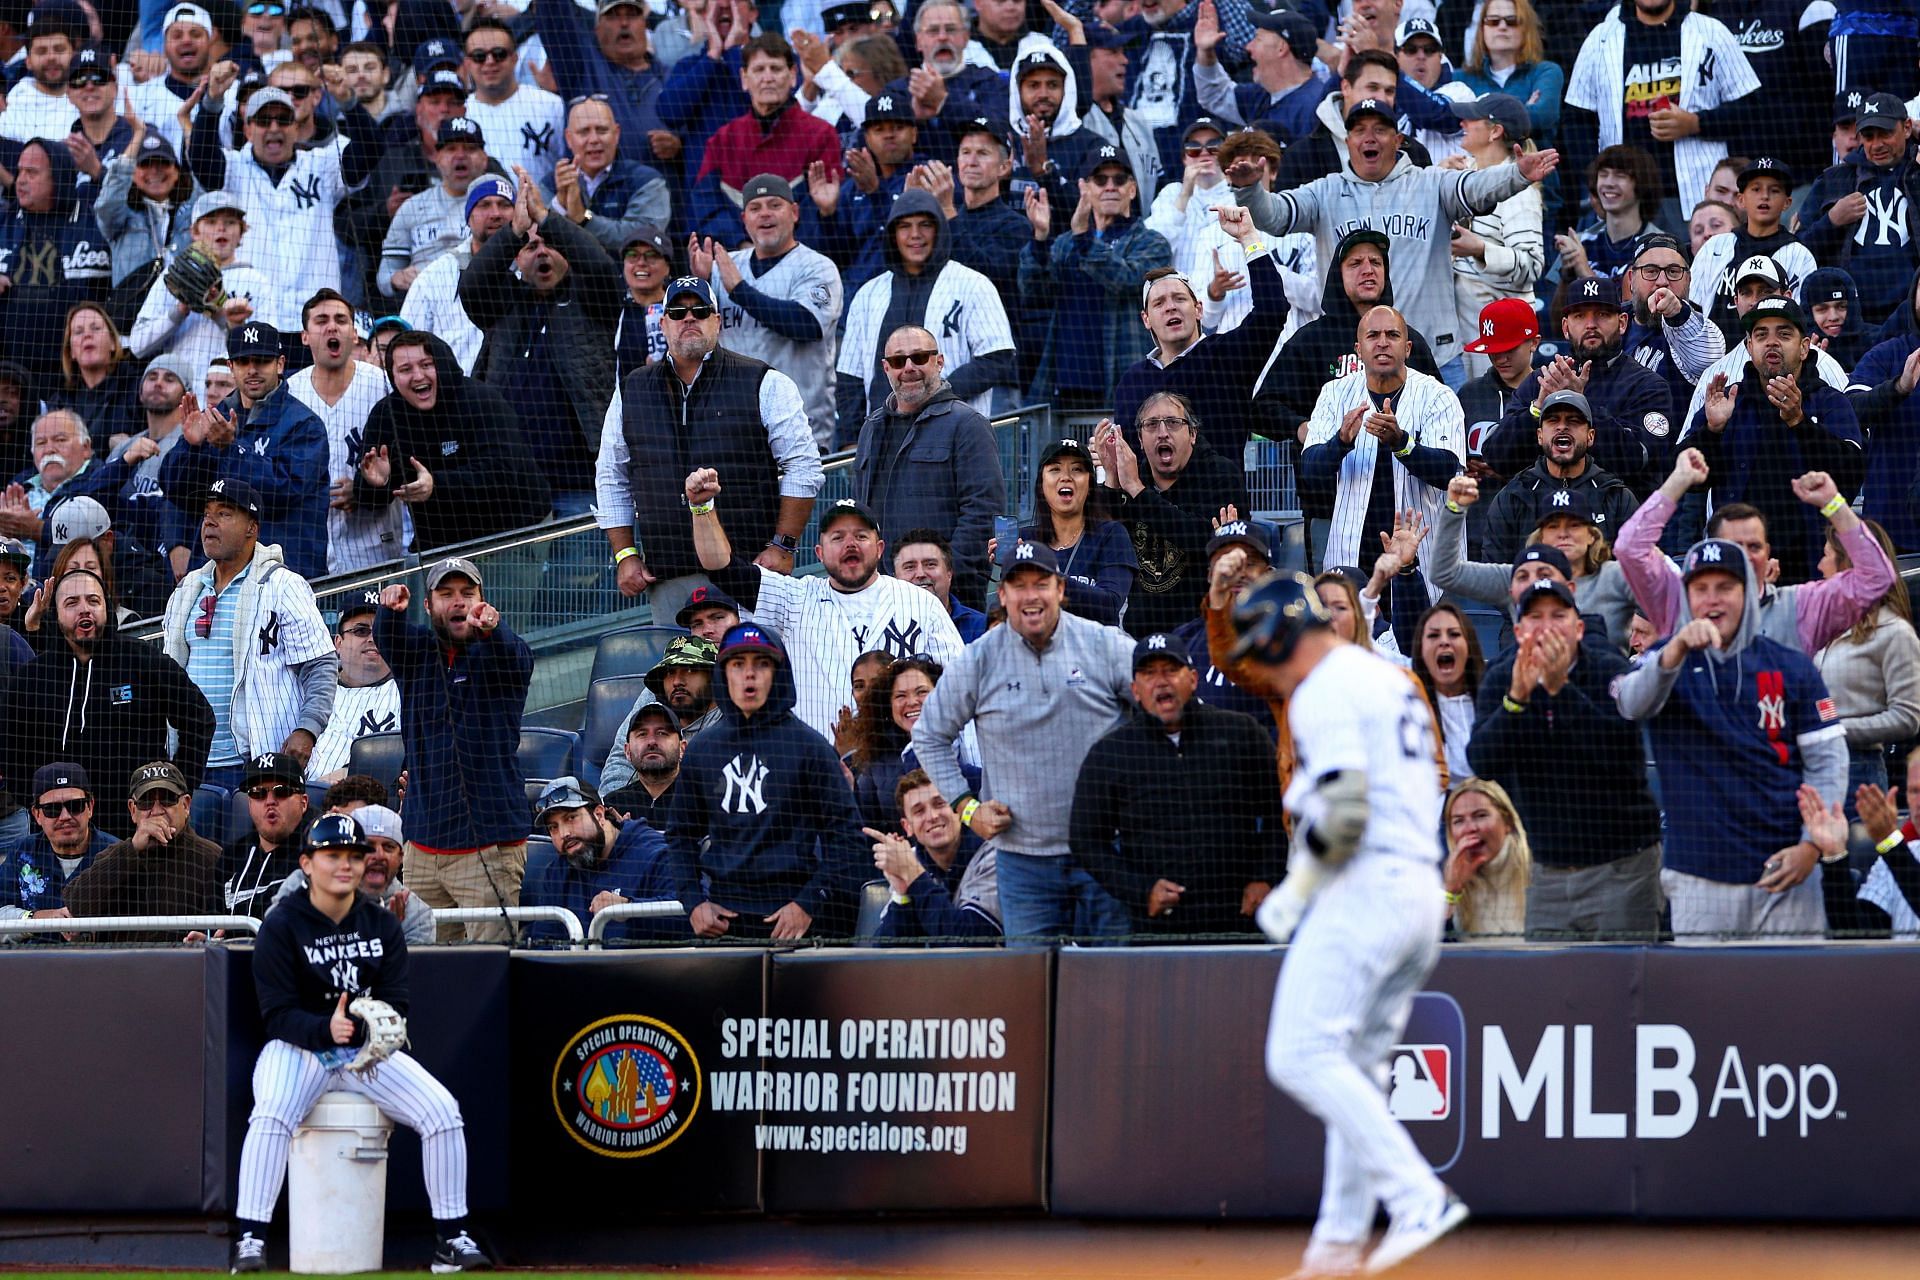 Yankees fans react to the Trade Deadline. (don't laugh, you'd be